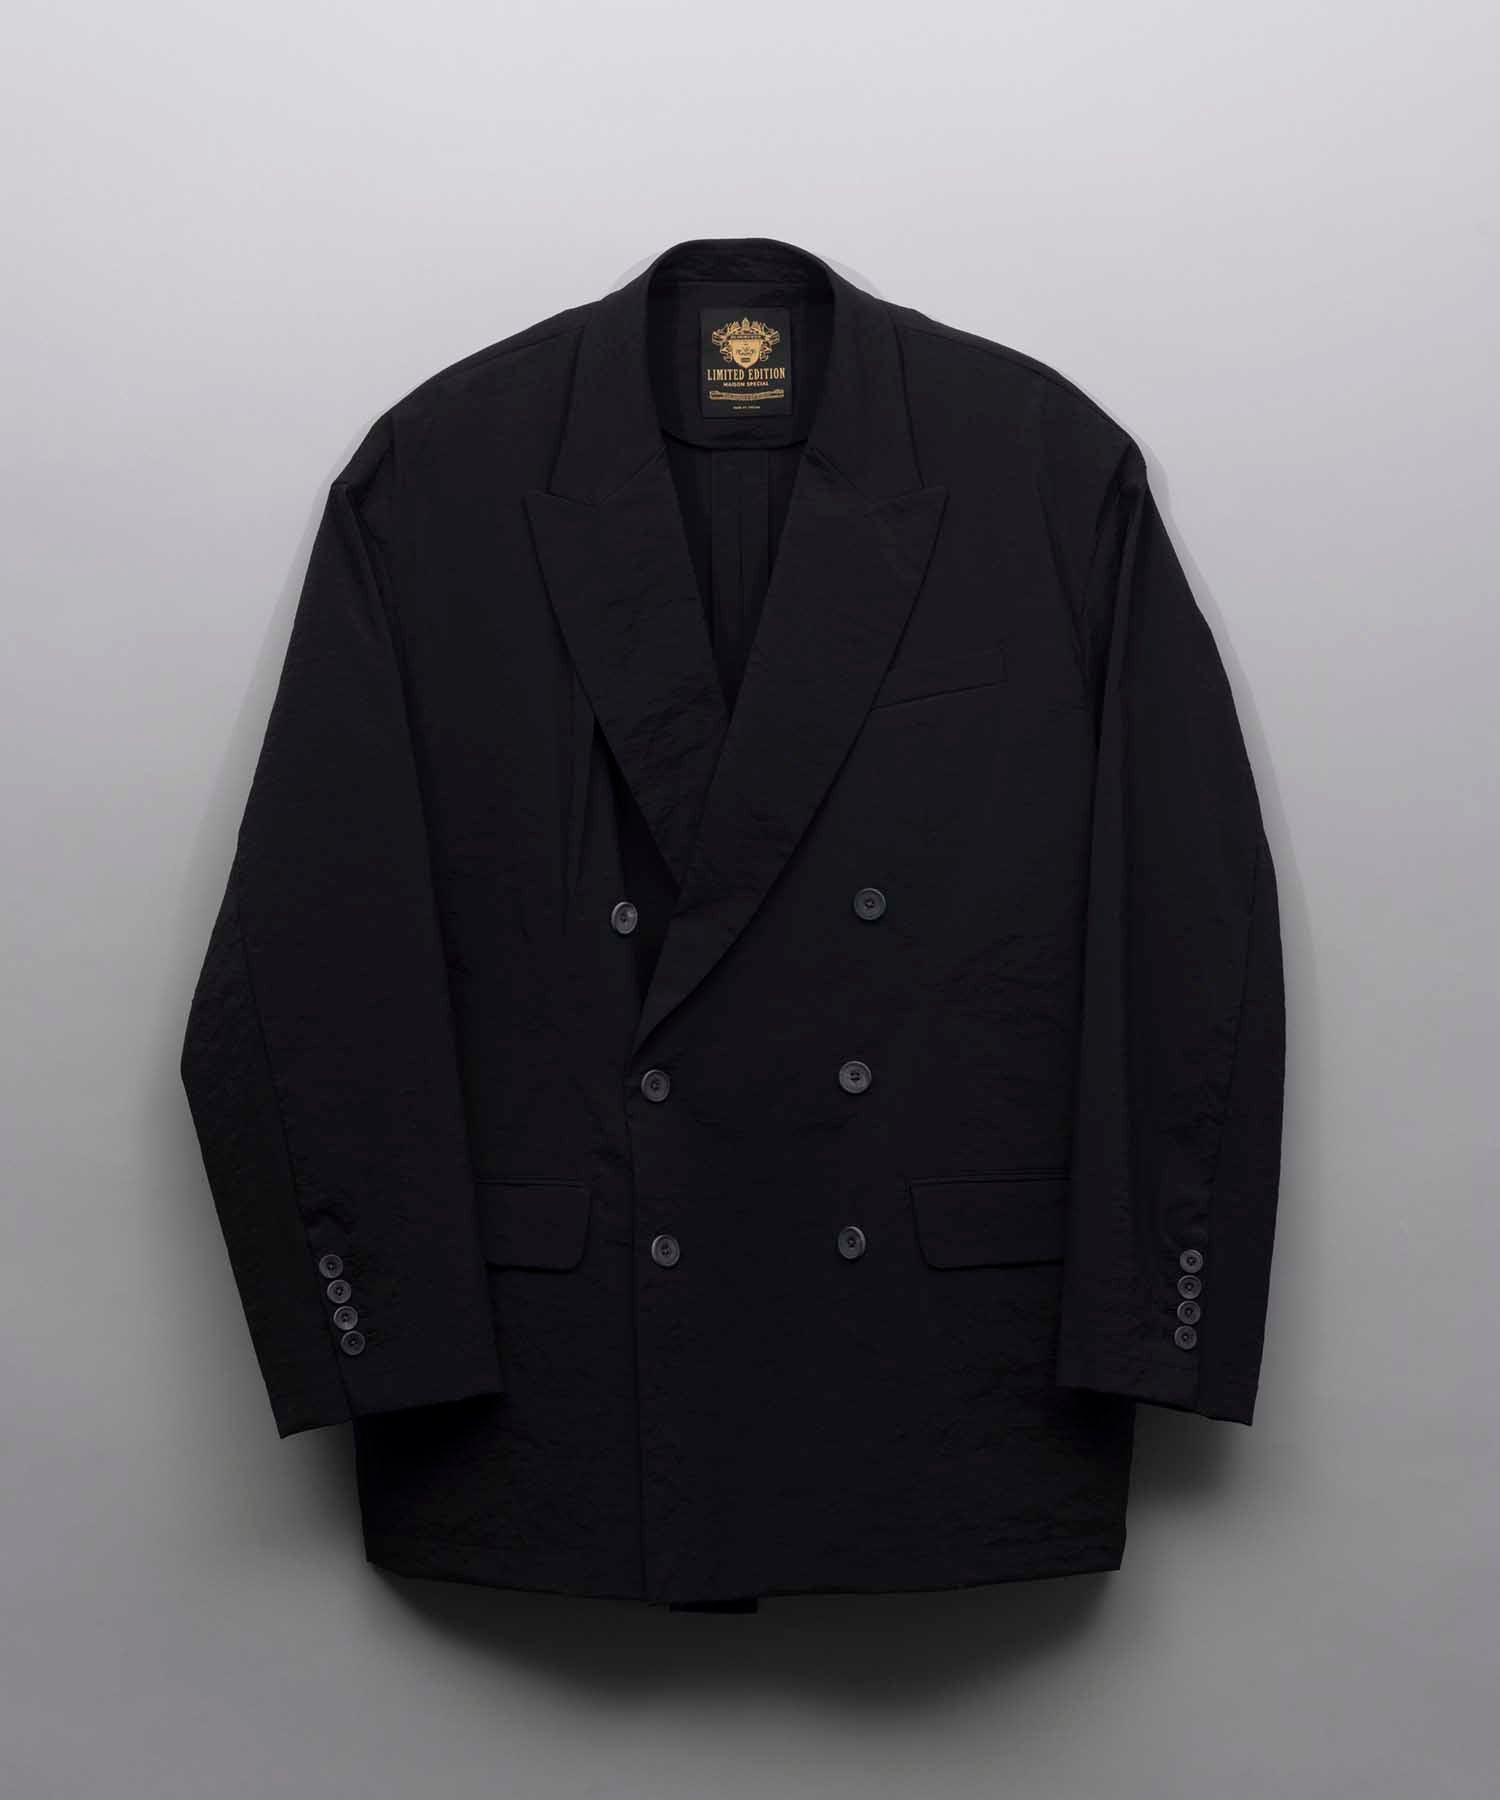 [Limited Edition] Prime-Over Peaked Lapel Double Tailored Jacket